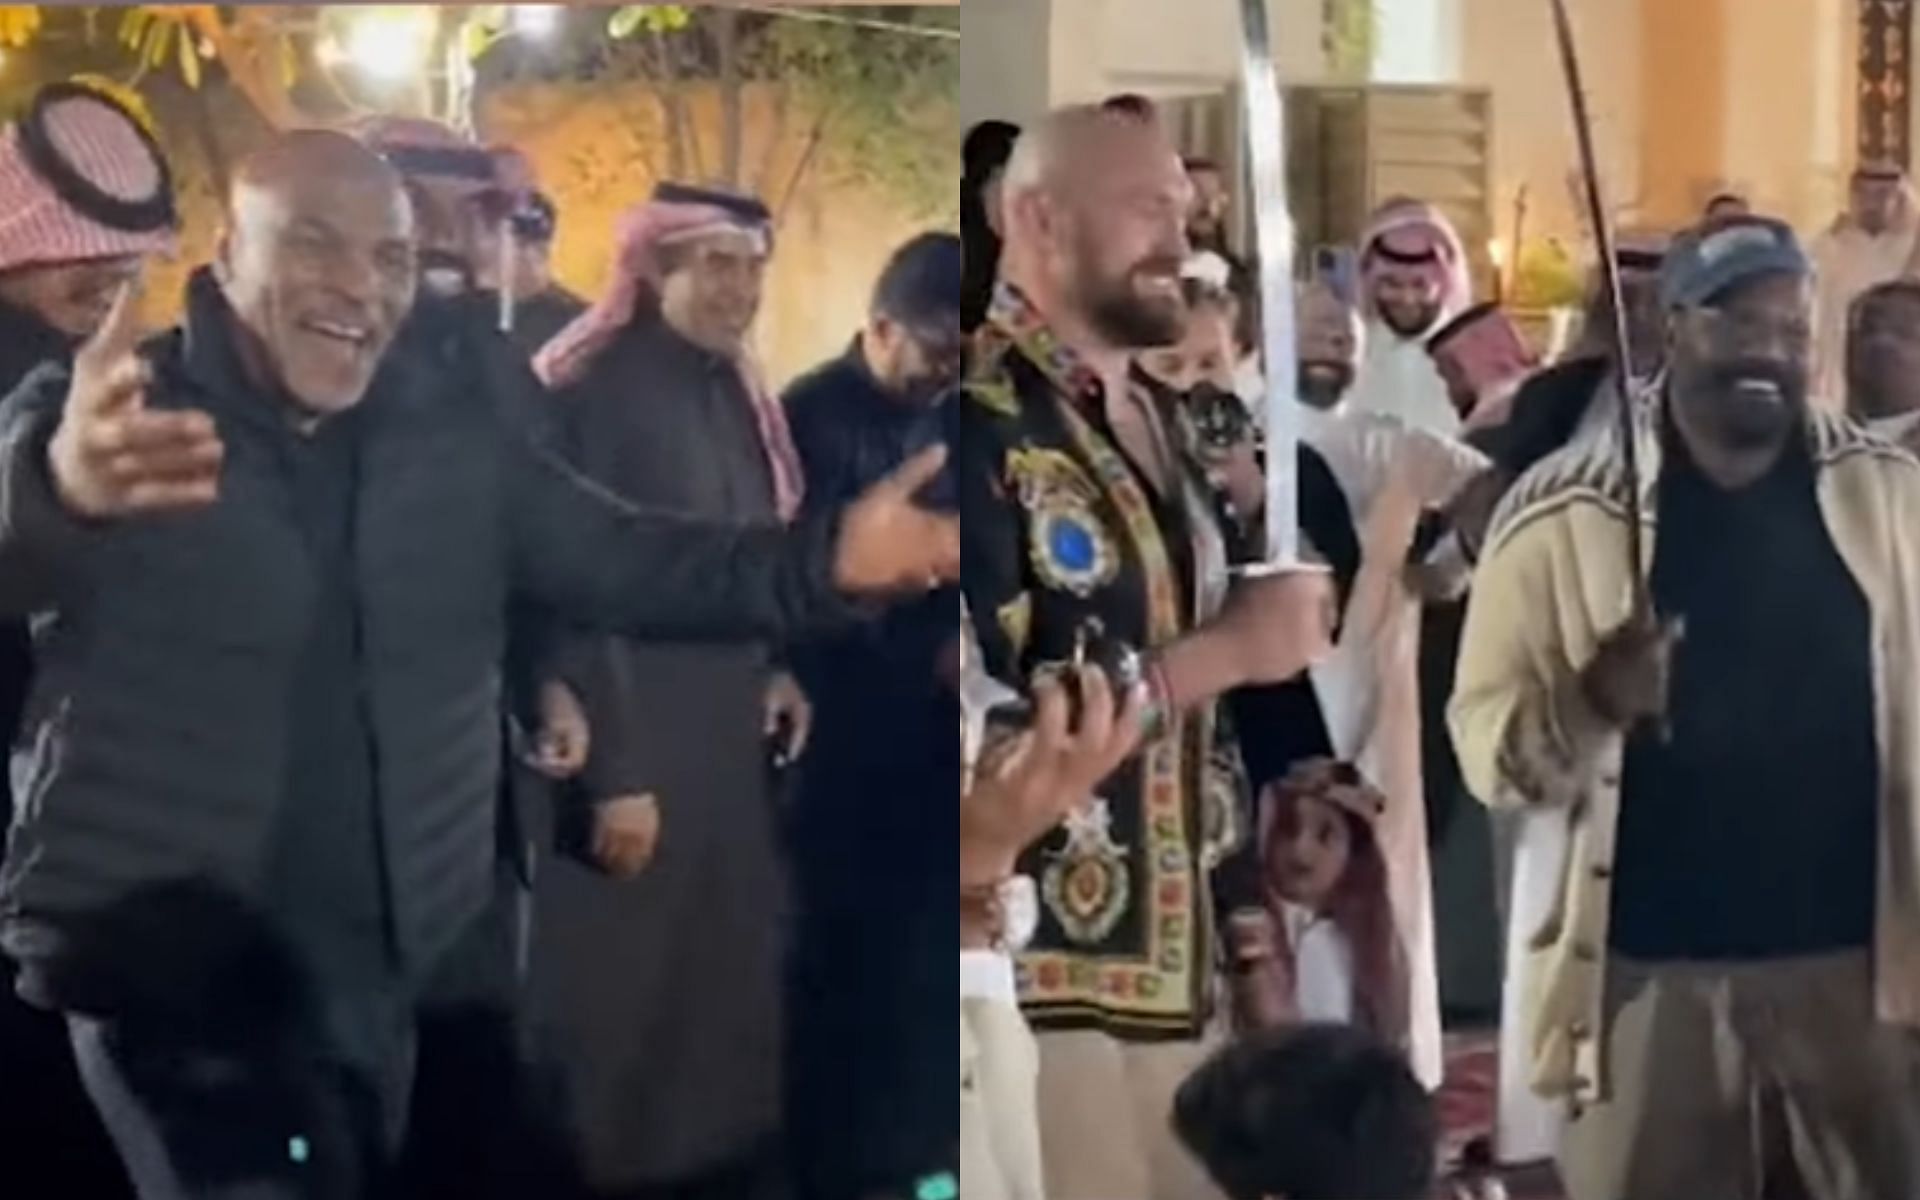 Screenshots of Tyson Fury and Derek Chisora (left) and Mike Tyson (right) [Images courtesy: @inside.fighting on YouTube]